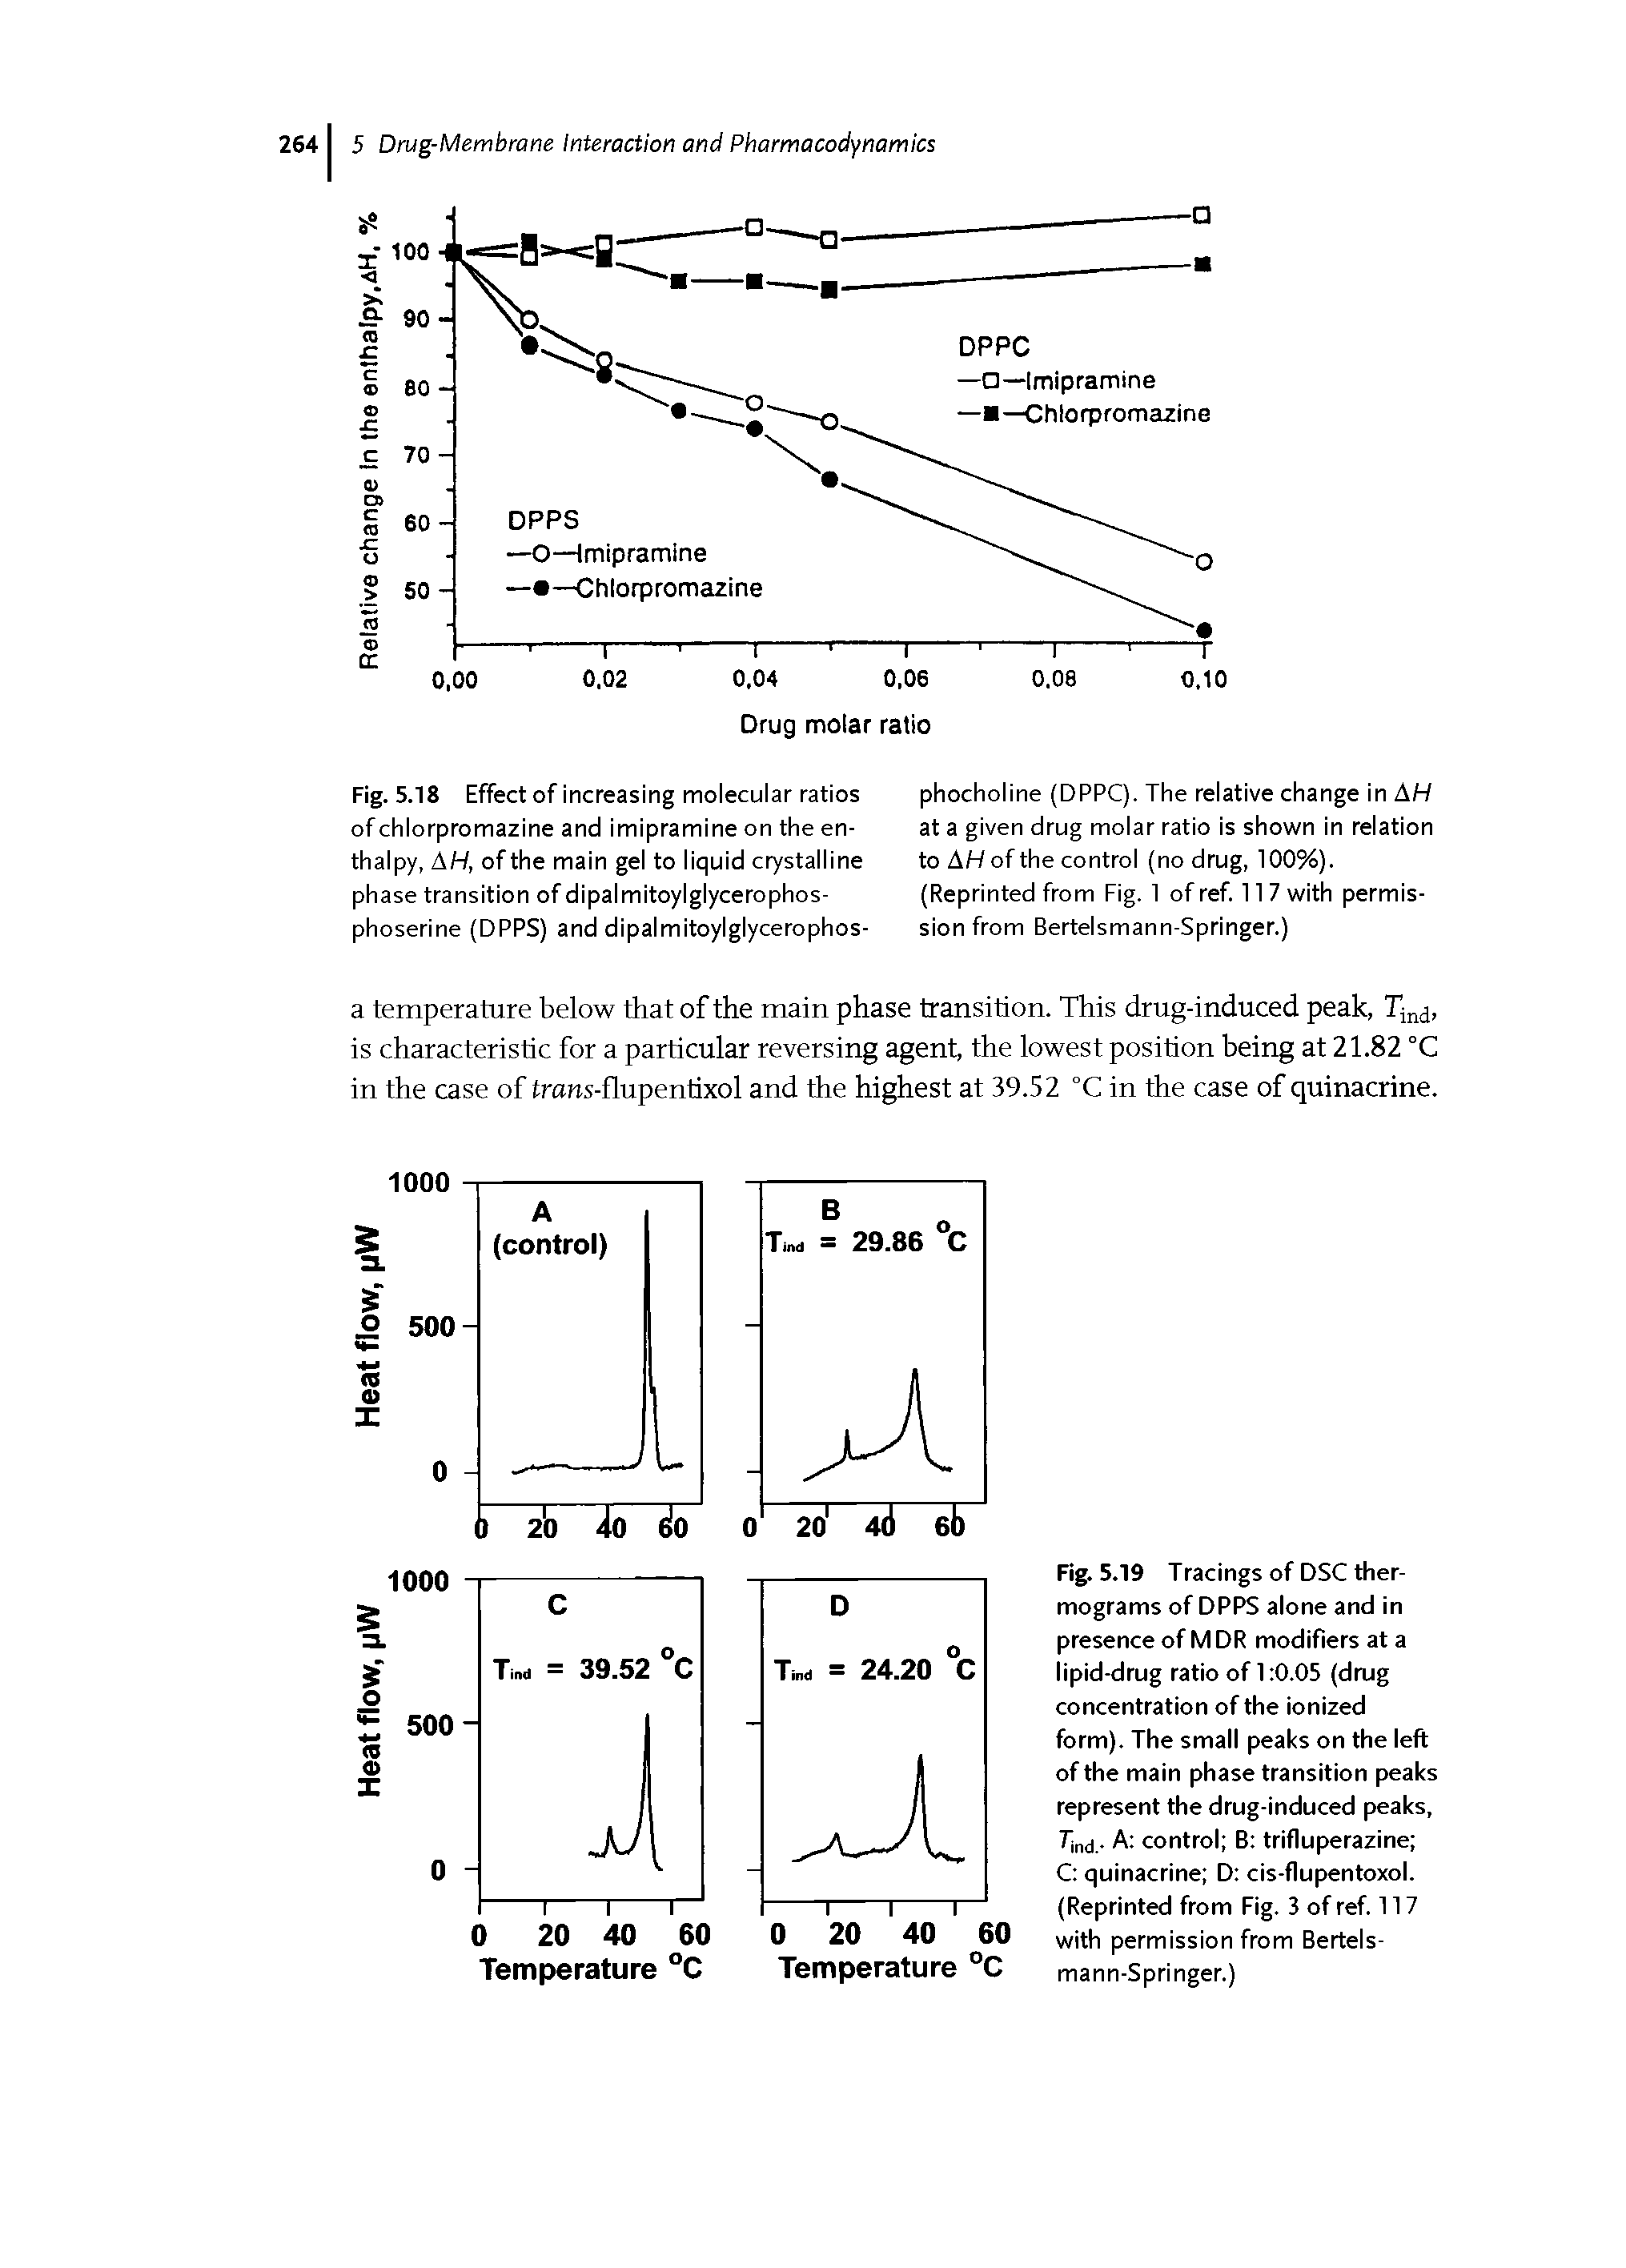 Fig. 5.19 Tracings of DSC thermograms of DPPS alone and in presence of MDR modifiers at a lipid-drug ratio of 1 0.05 (drug concentration of the ionized form). The small peaks on the left of the main phase transition peaks represent the drug-induced peaks, Tinj. A control B trifluperazine ...